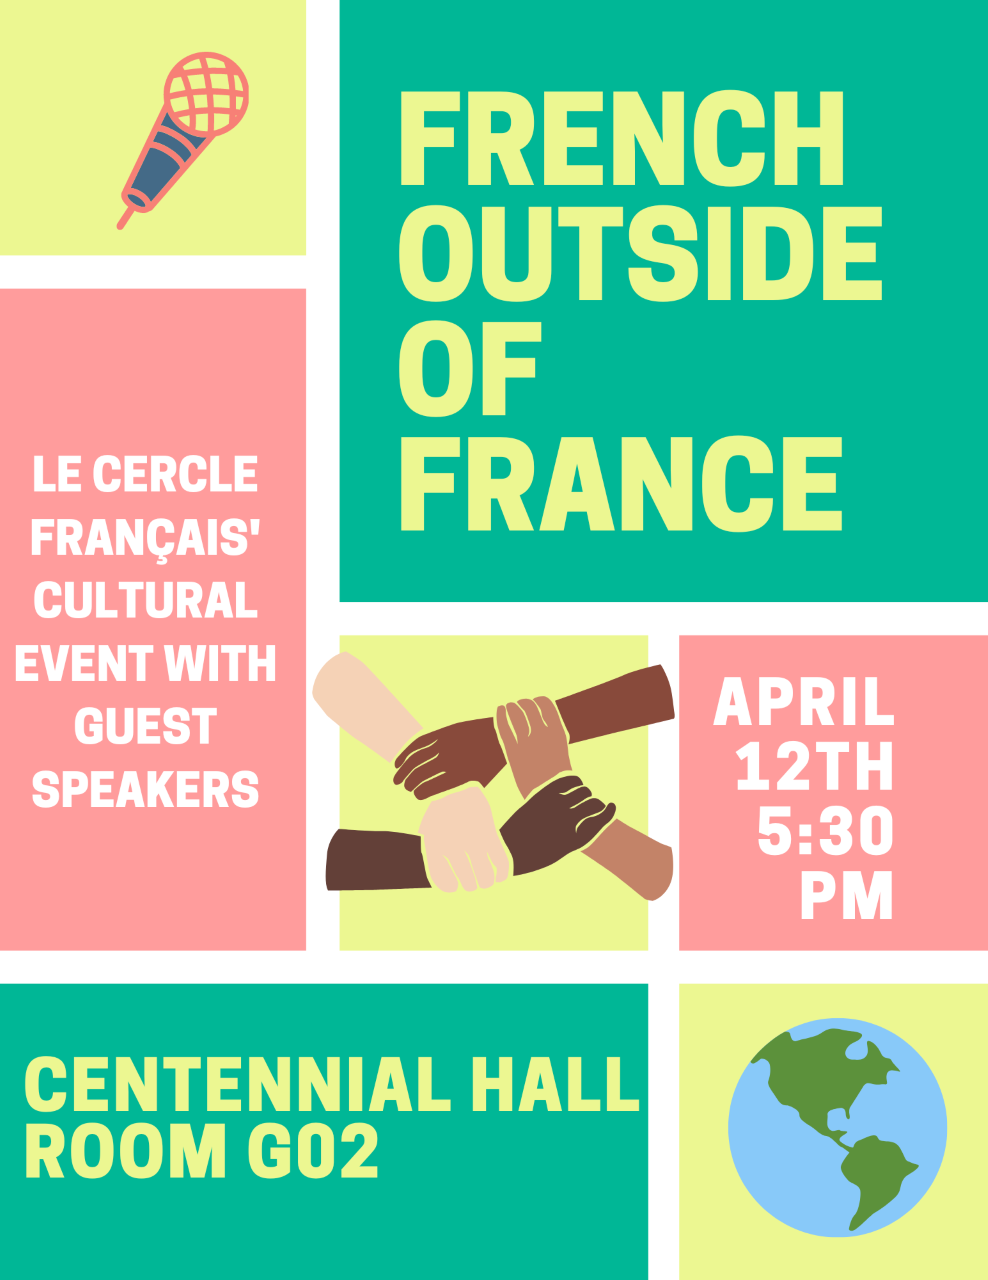 Microphone, hands on wrists in a square, text: French Outside of France, Le Cercle Français' cultural event with guest speakers, April 12th 5:30pm